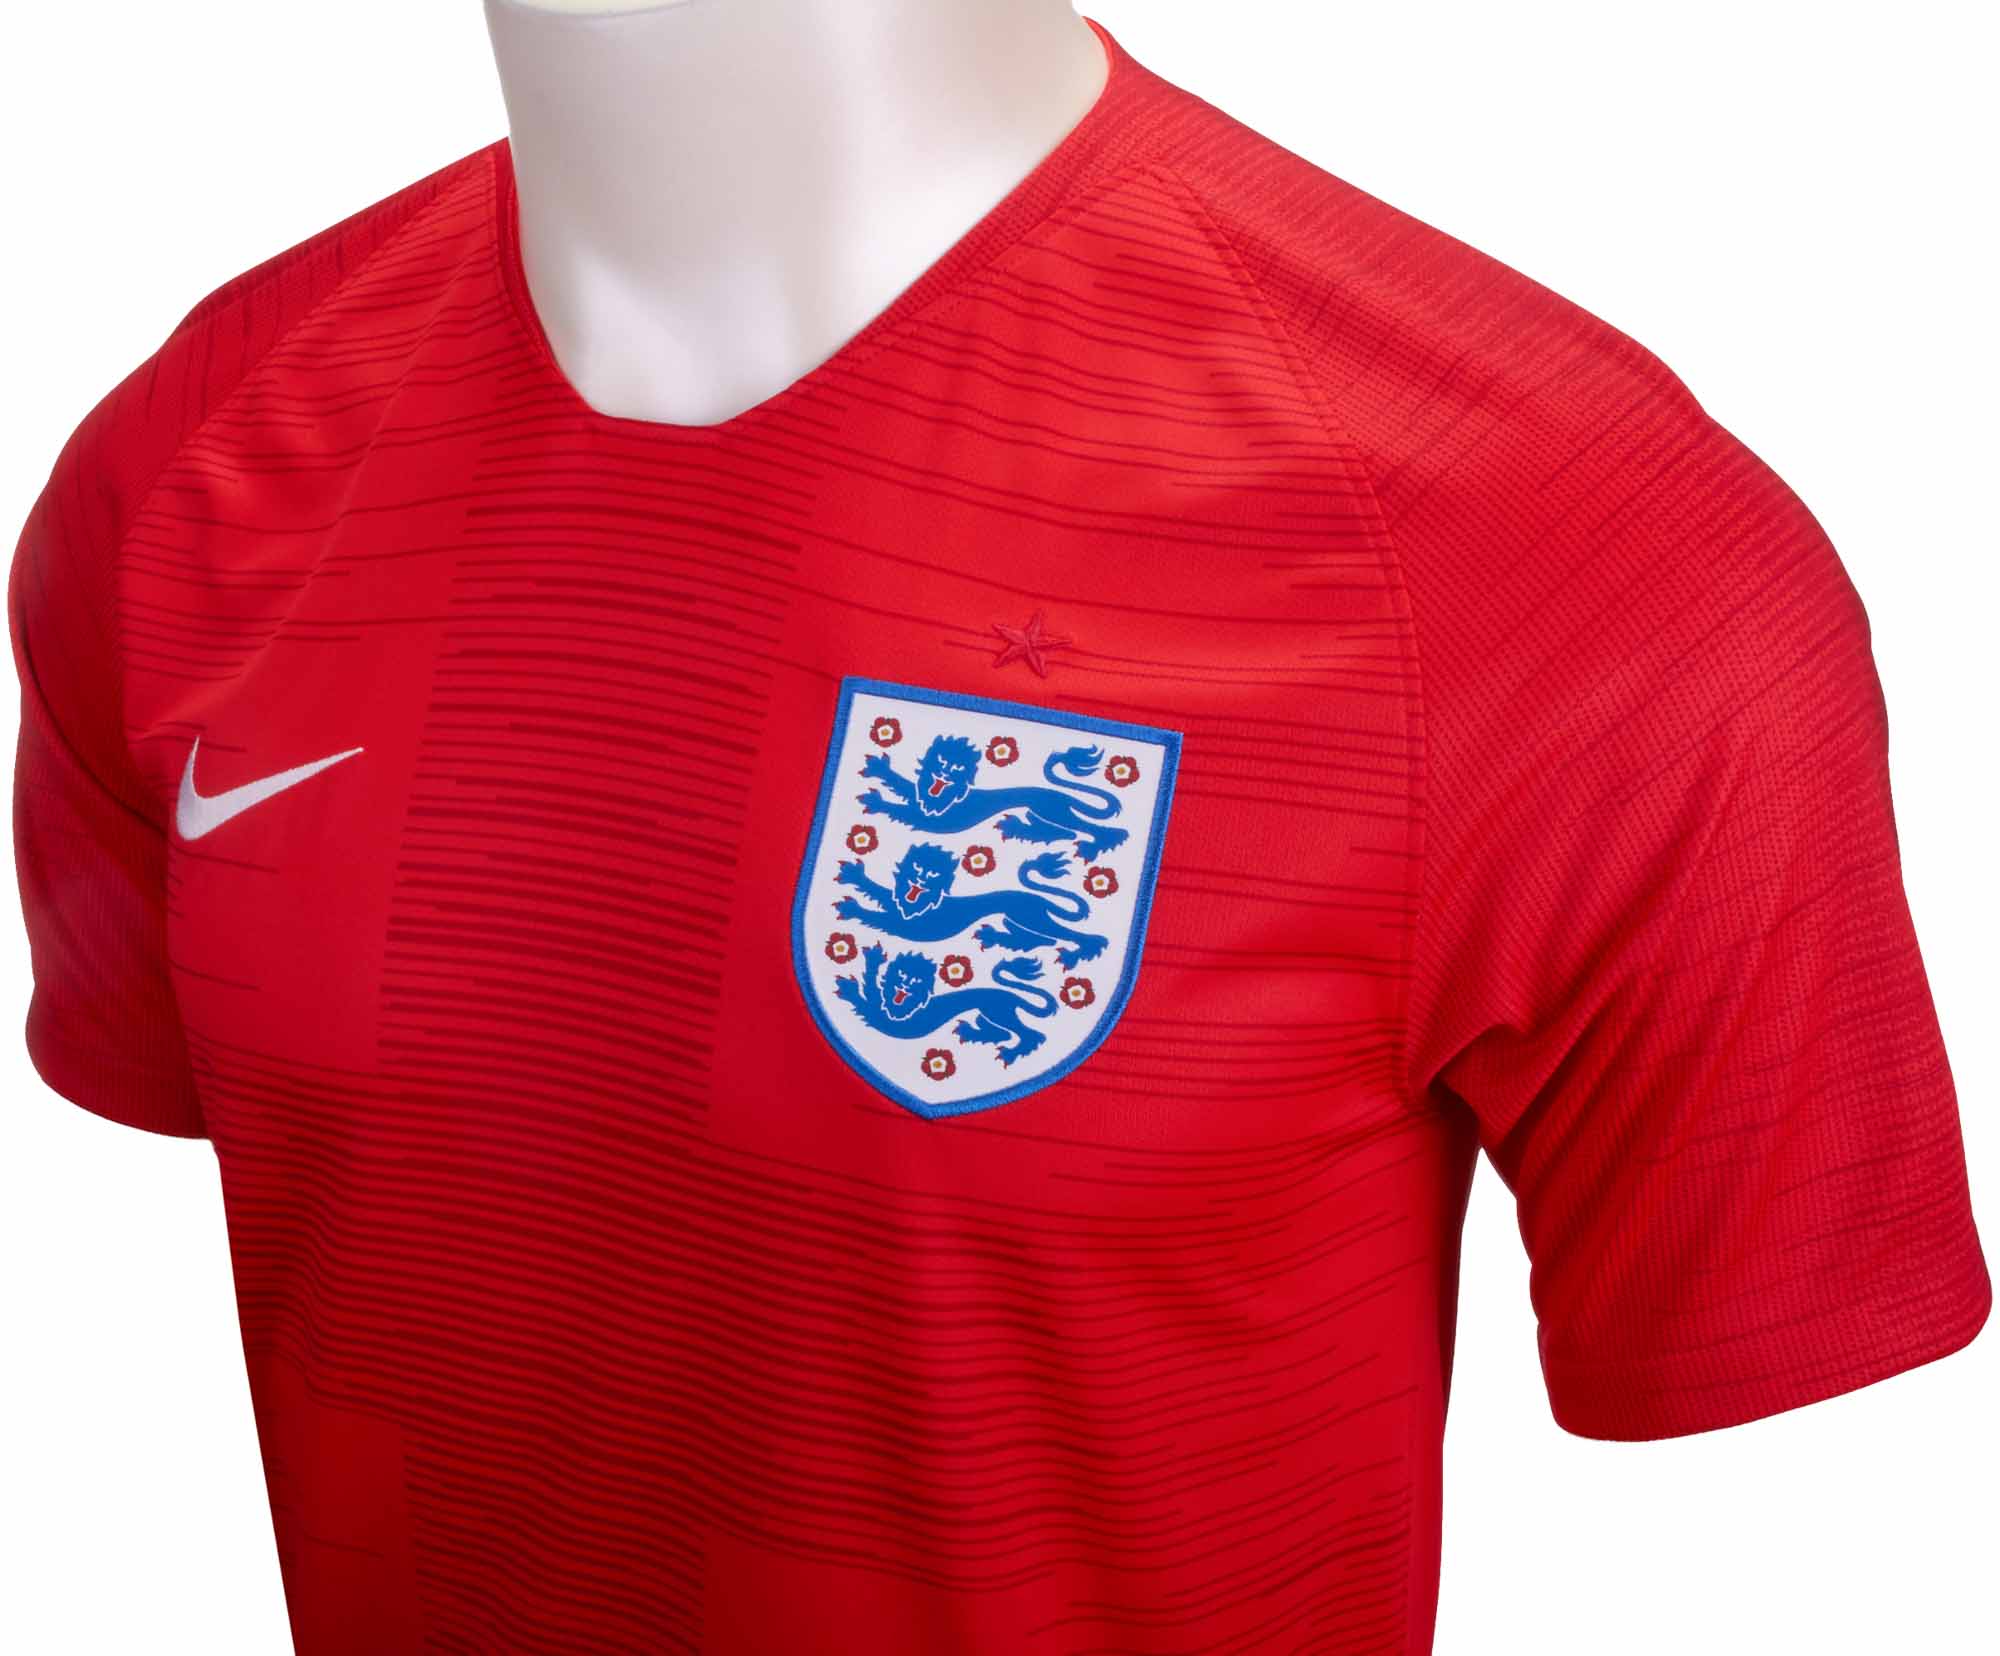 england jersey red